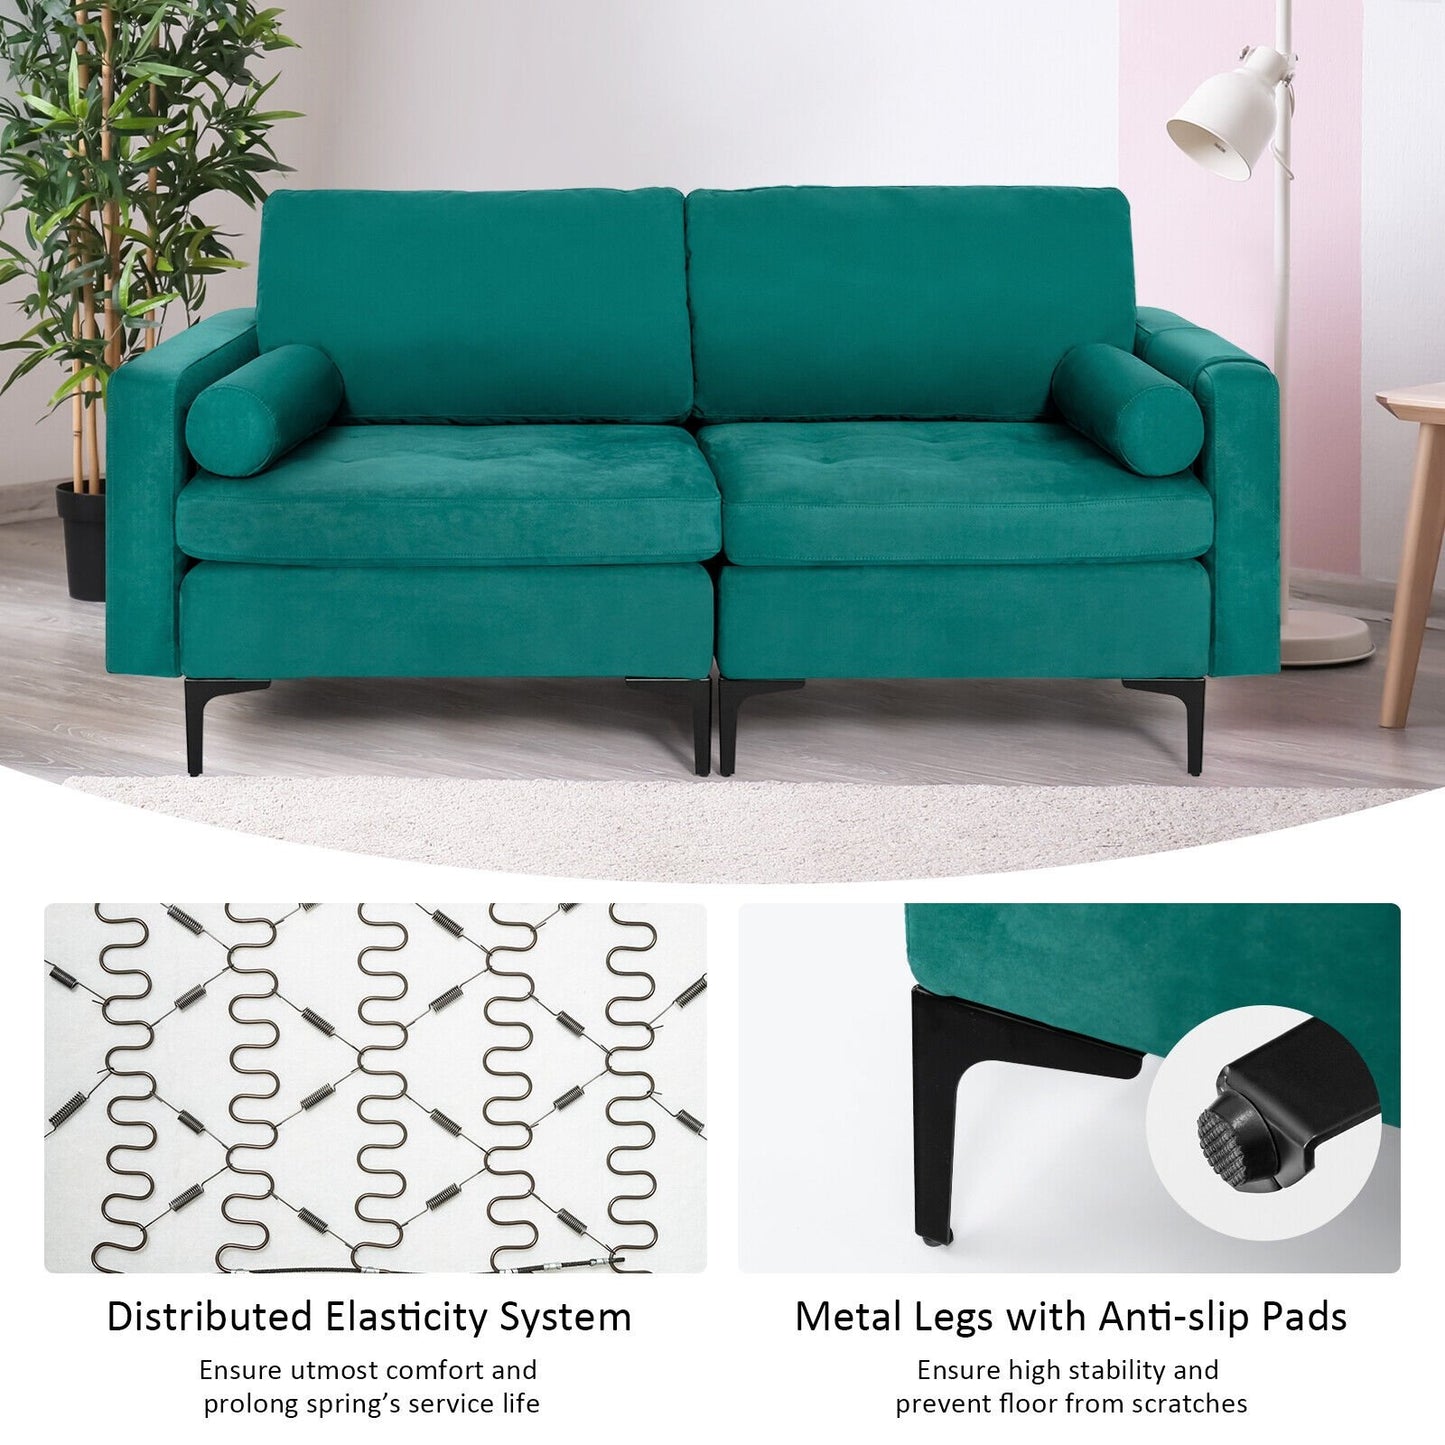 Modular 1/2/3/4-Seat L-Shaped Sectional Sofa Couch with Socket USB Port-2-Seat, Turquoise